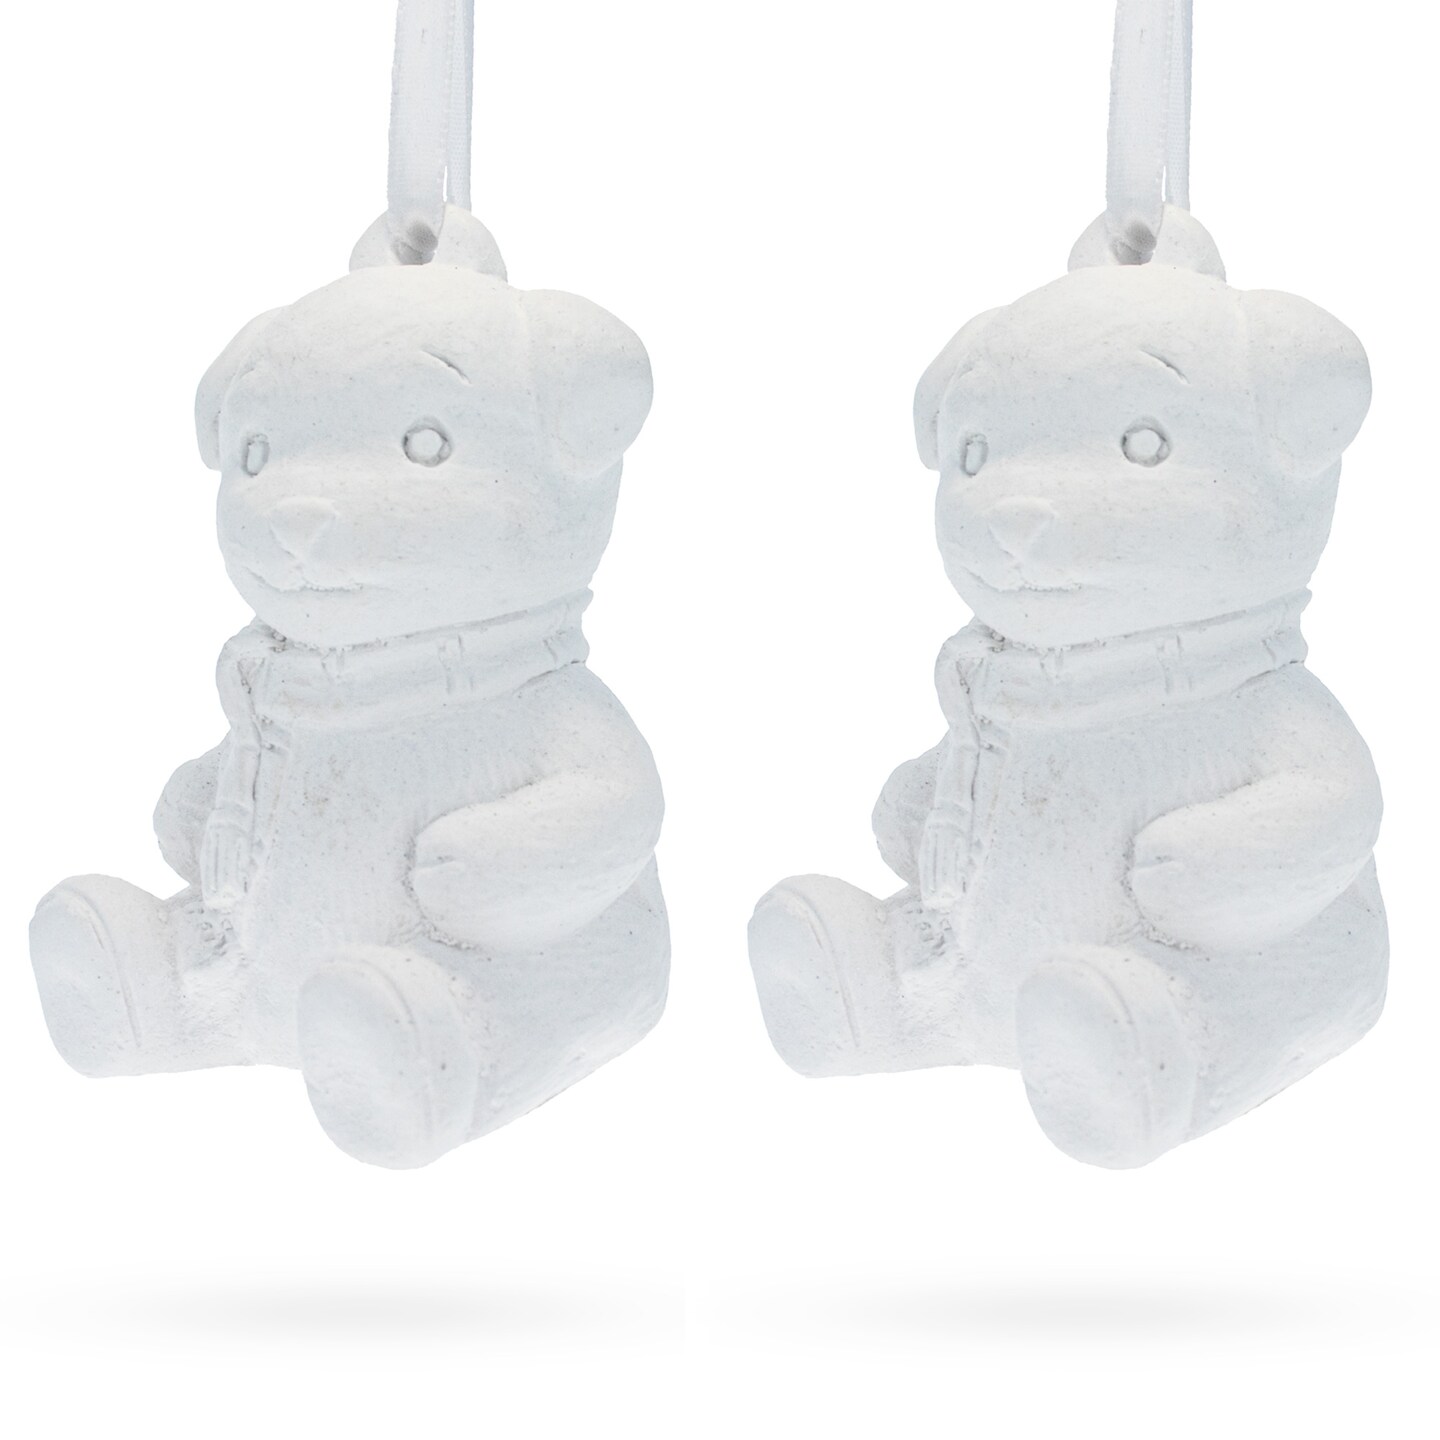 Set of 2 Blank White Unfinished Unpainted Plaster Teddy Bear Ornaments 3.5 Inches